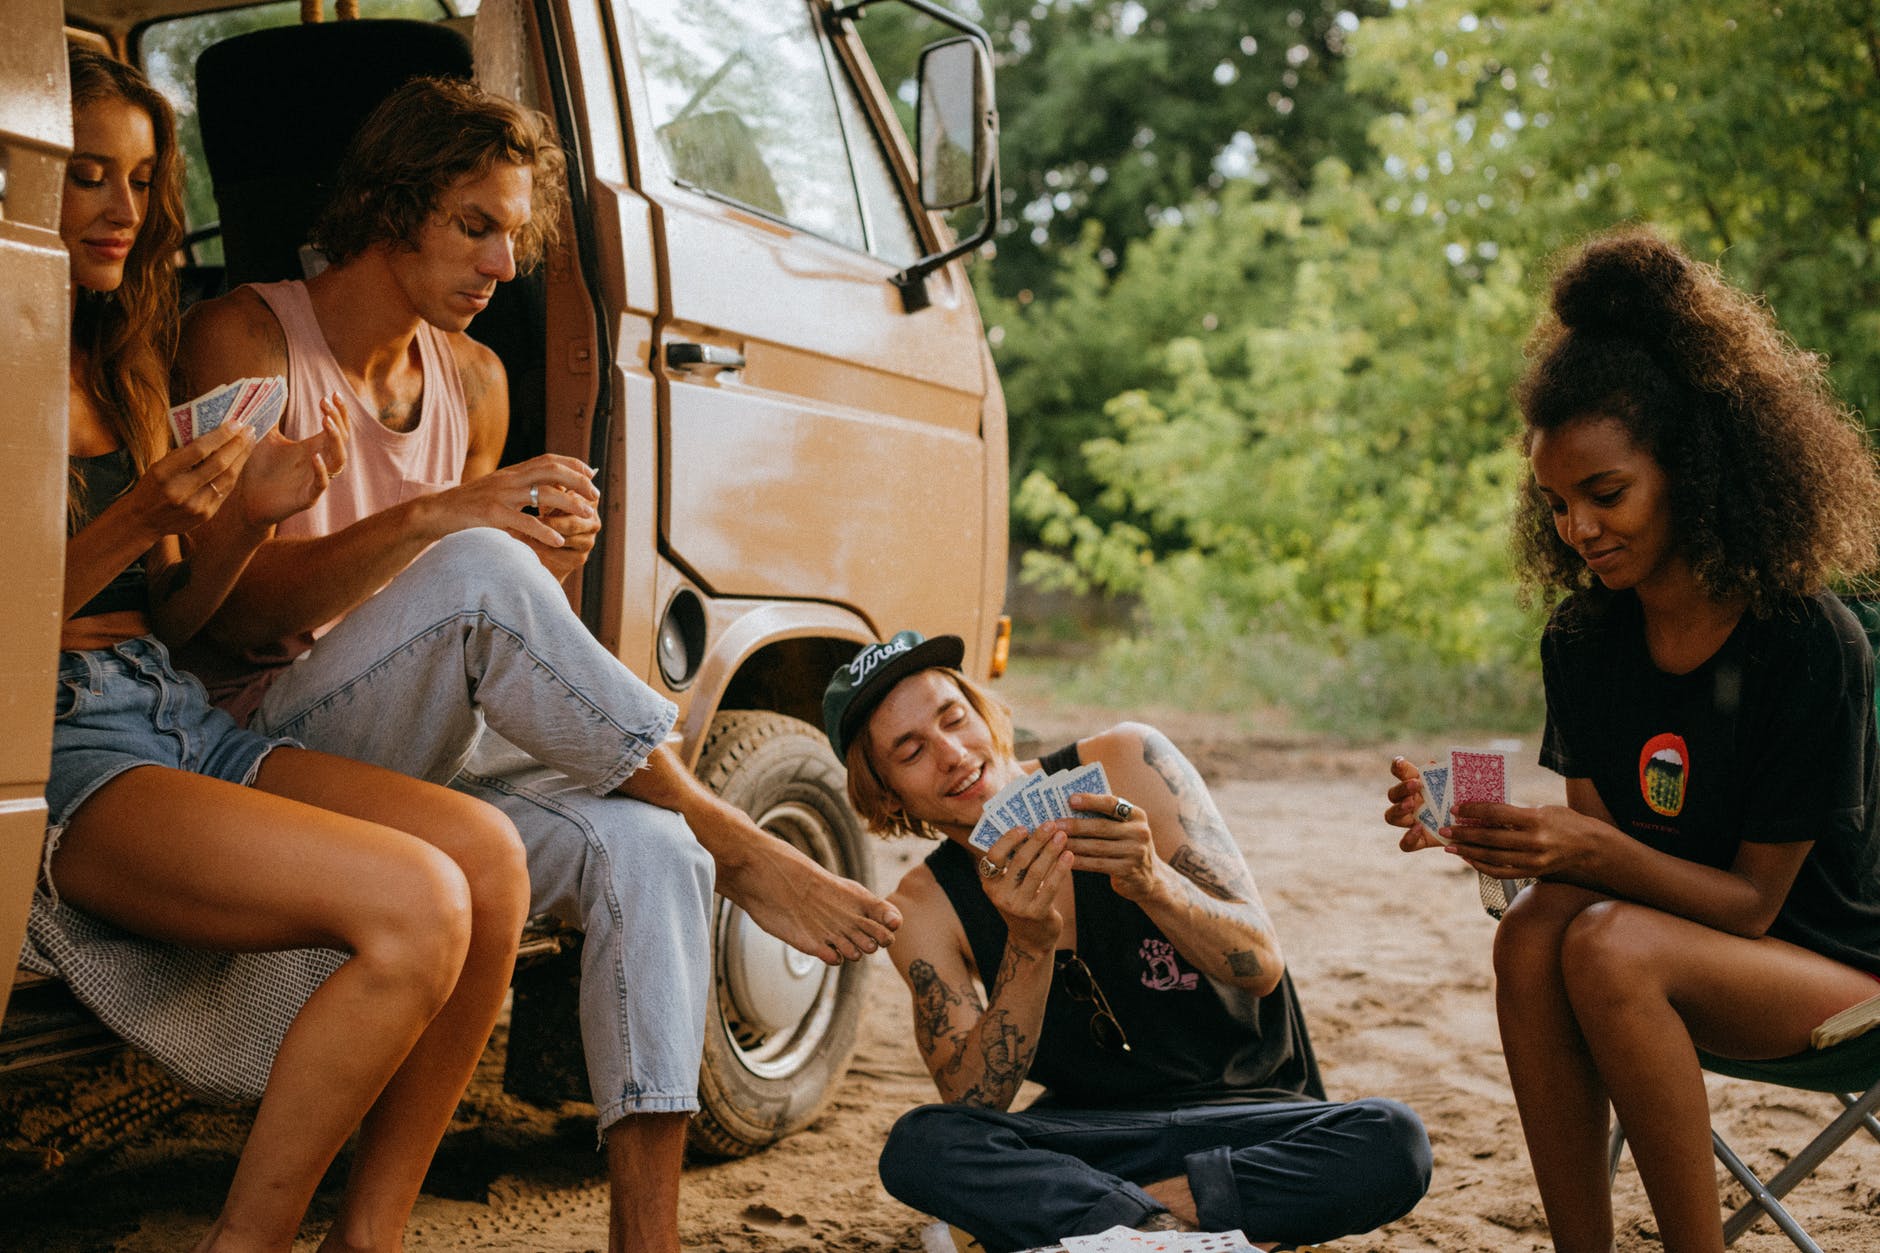 a group of friends playing cards by a campervan